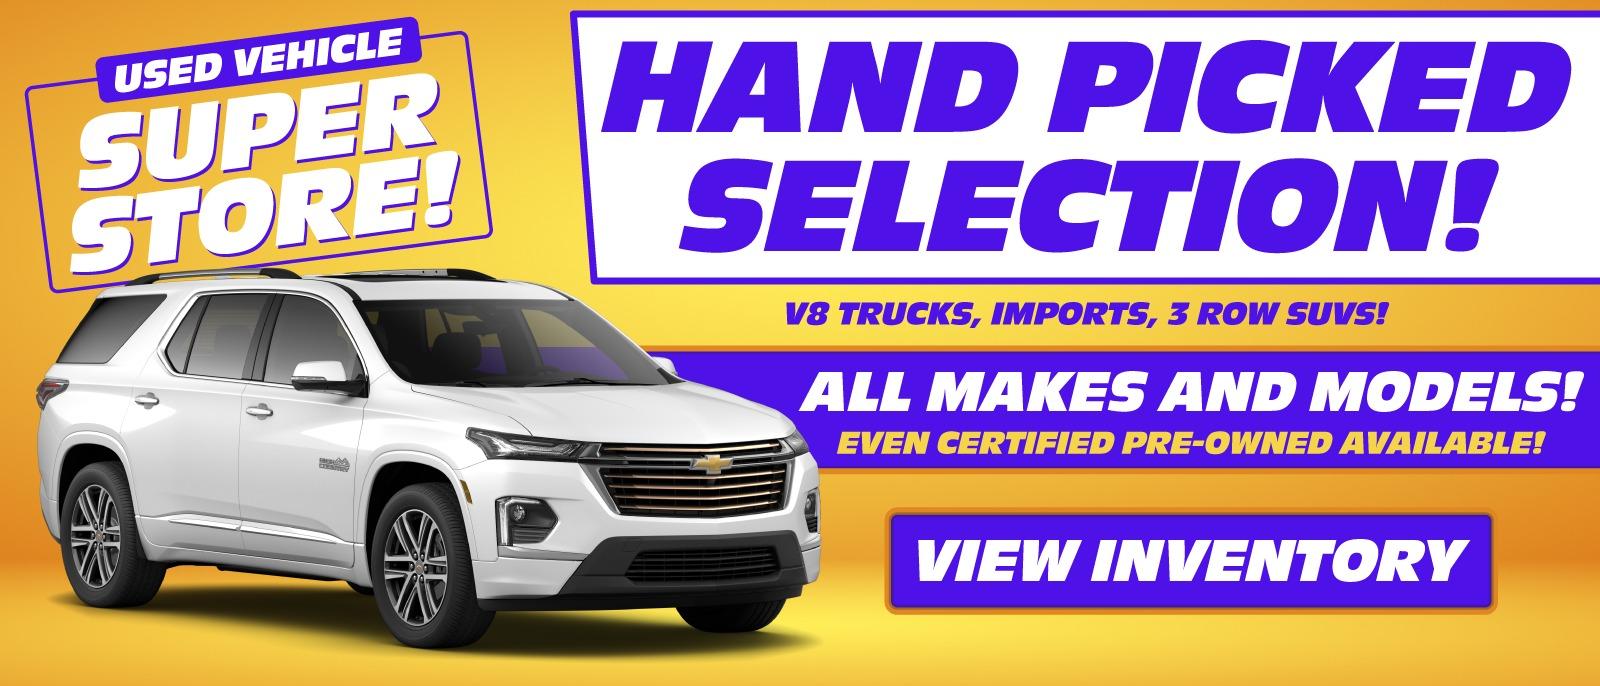 HAND PICKED SELECTION! V8 TRUCKS, IMPORTS, 3 ROW SUVS! ALL MAKES AND MODELS! EVEN CERTIFIED PRE-OWNED AVAILABLE!